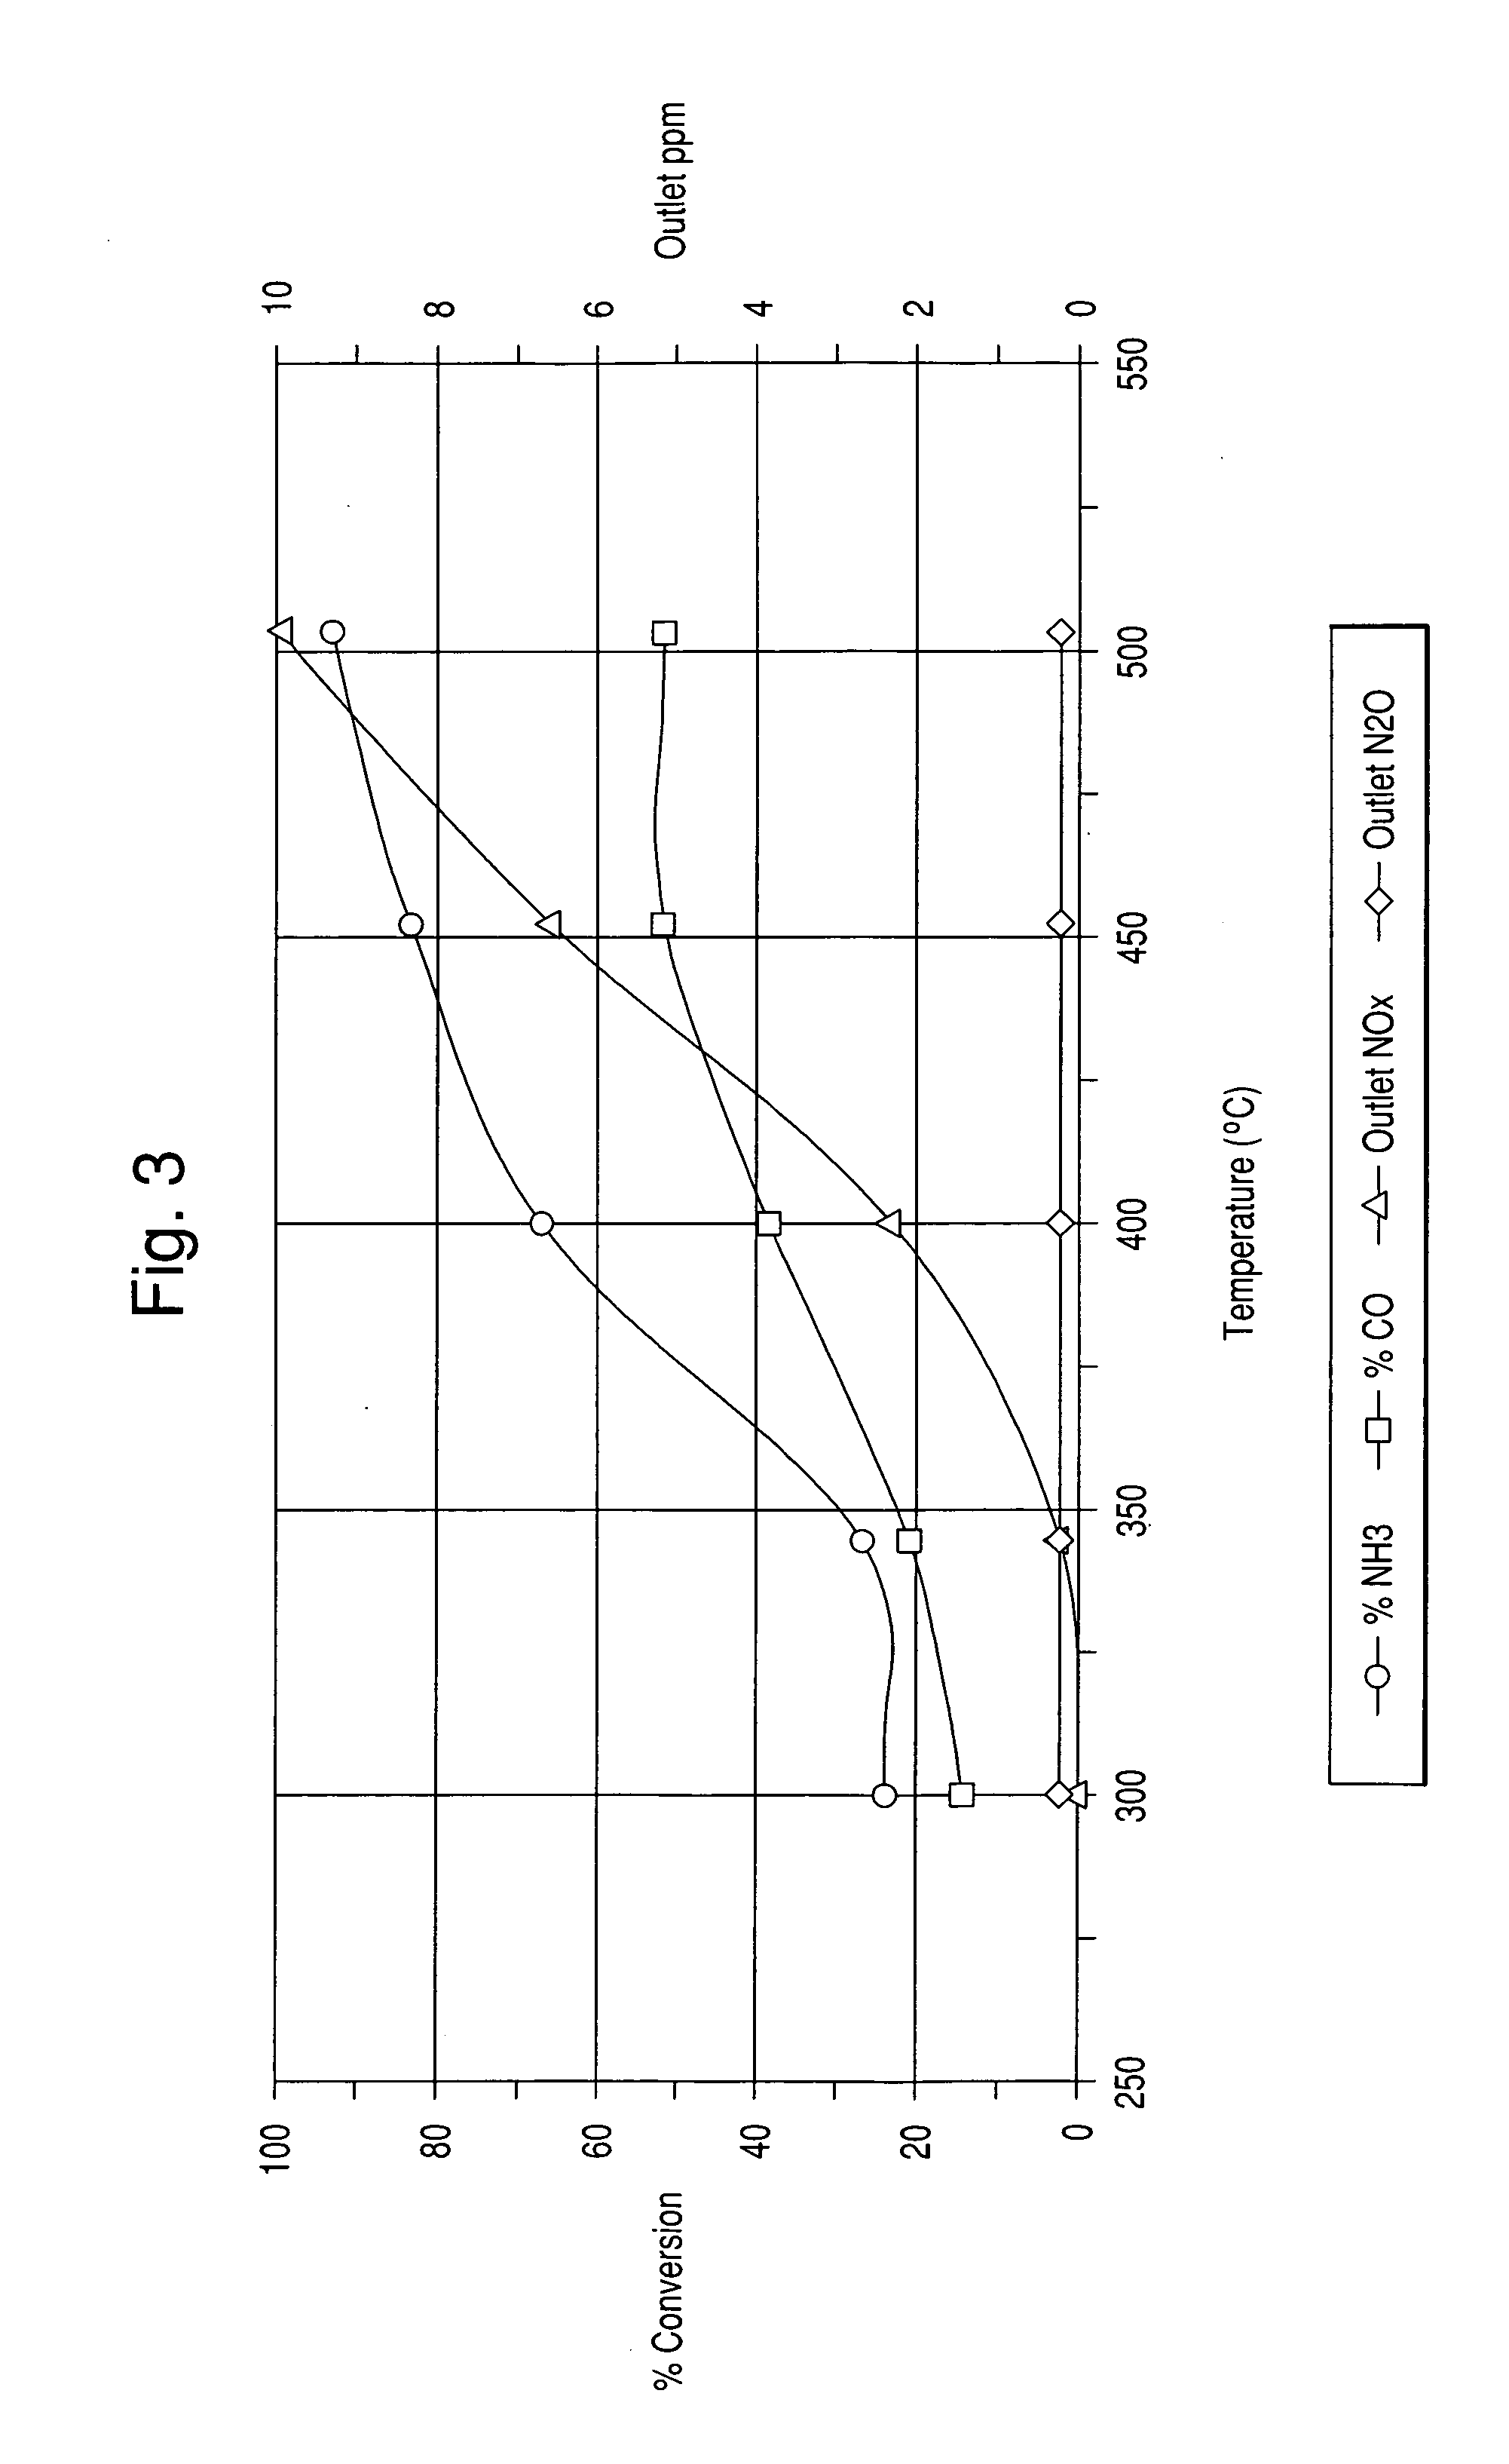 Ammonia oxidation catalyst for the coal fired utilities